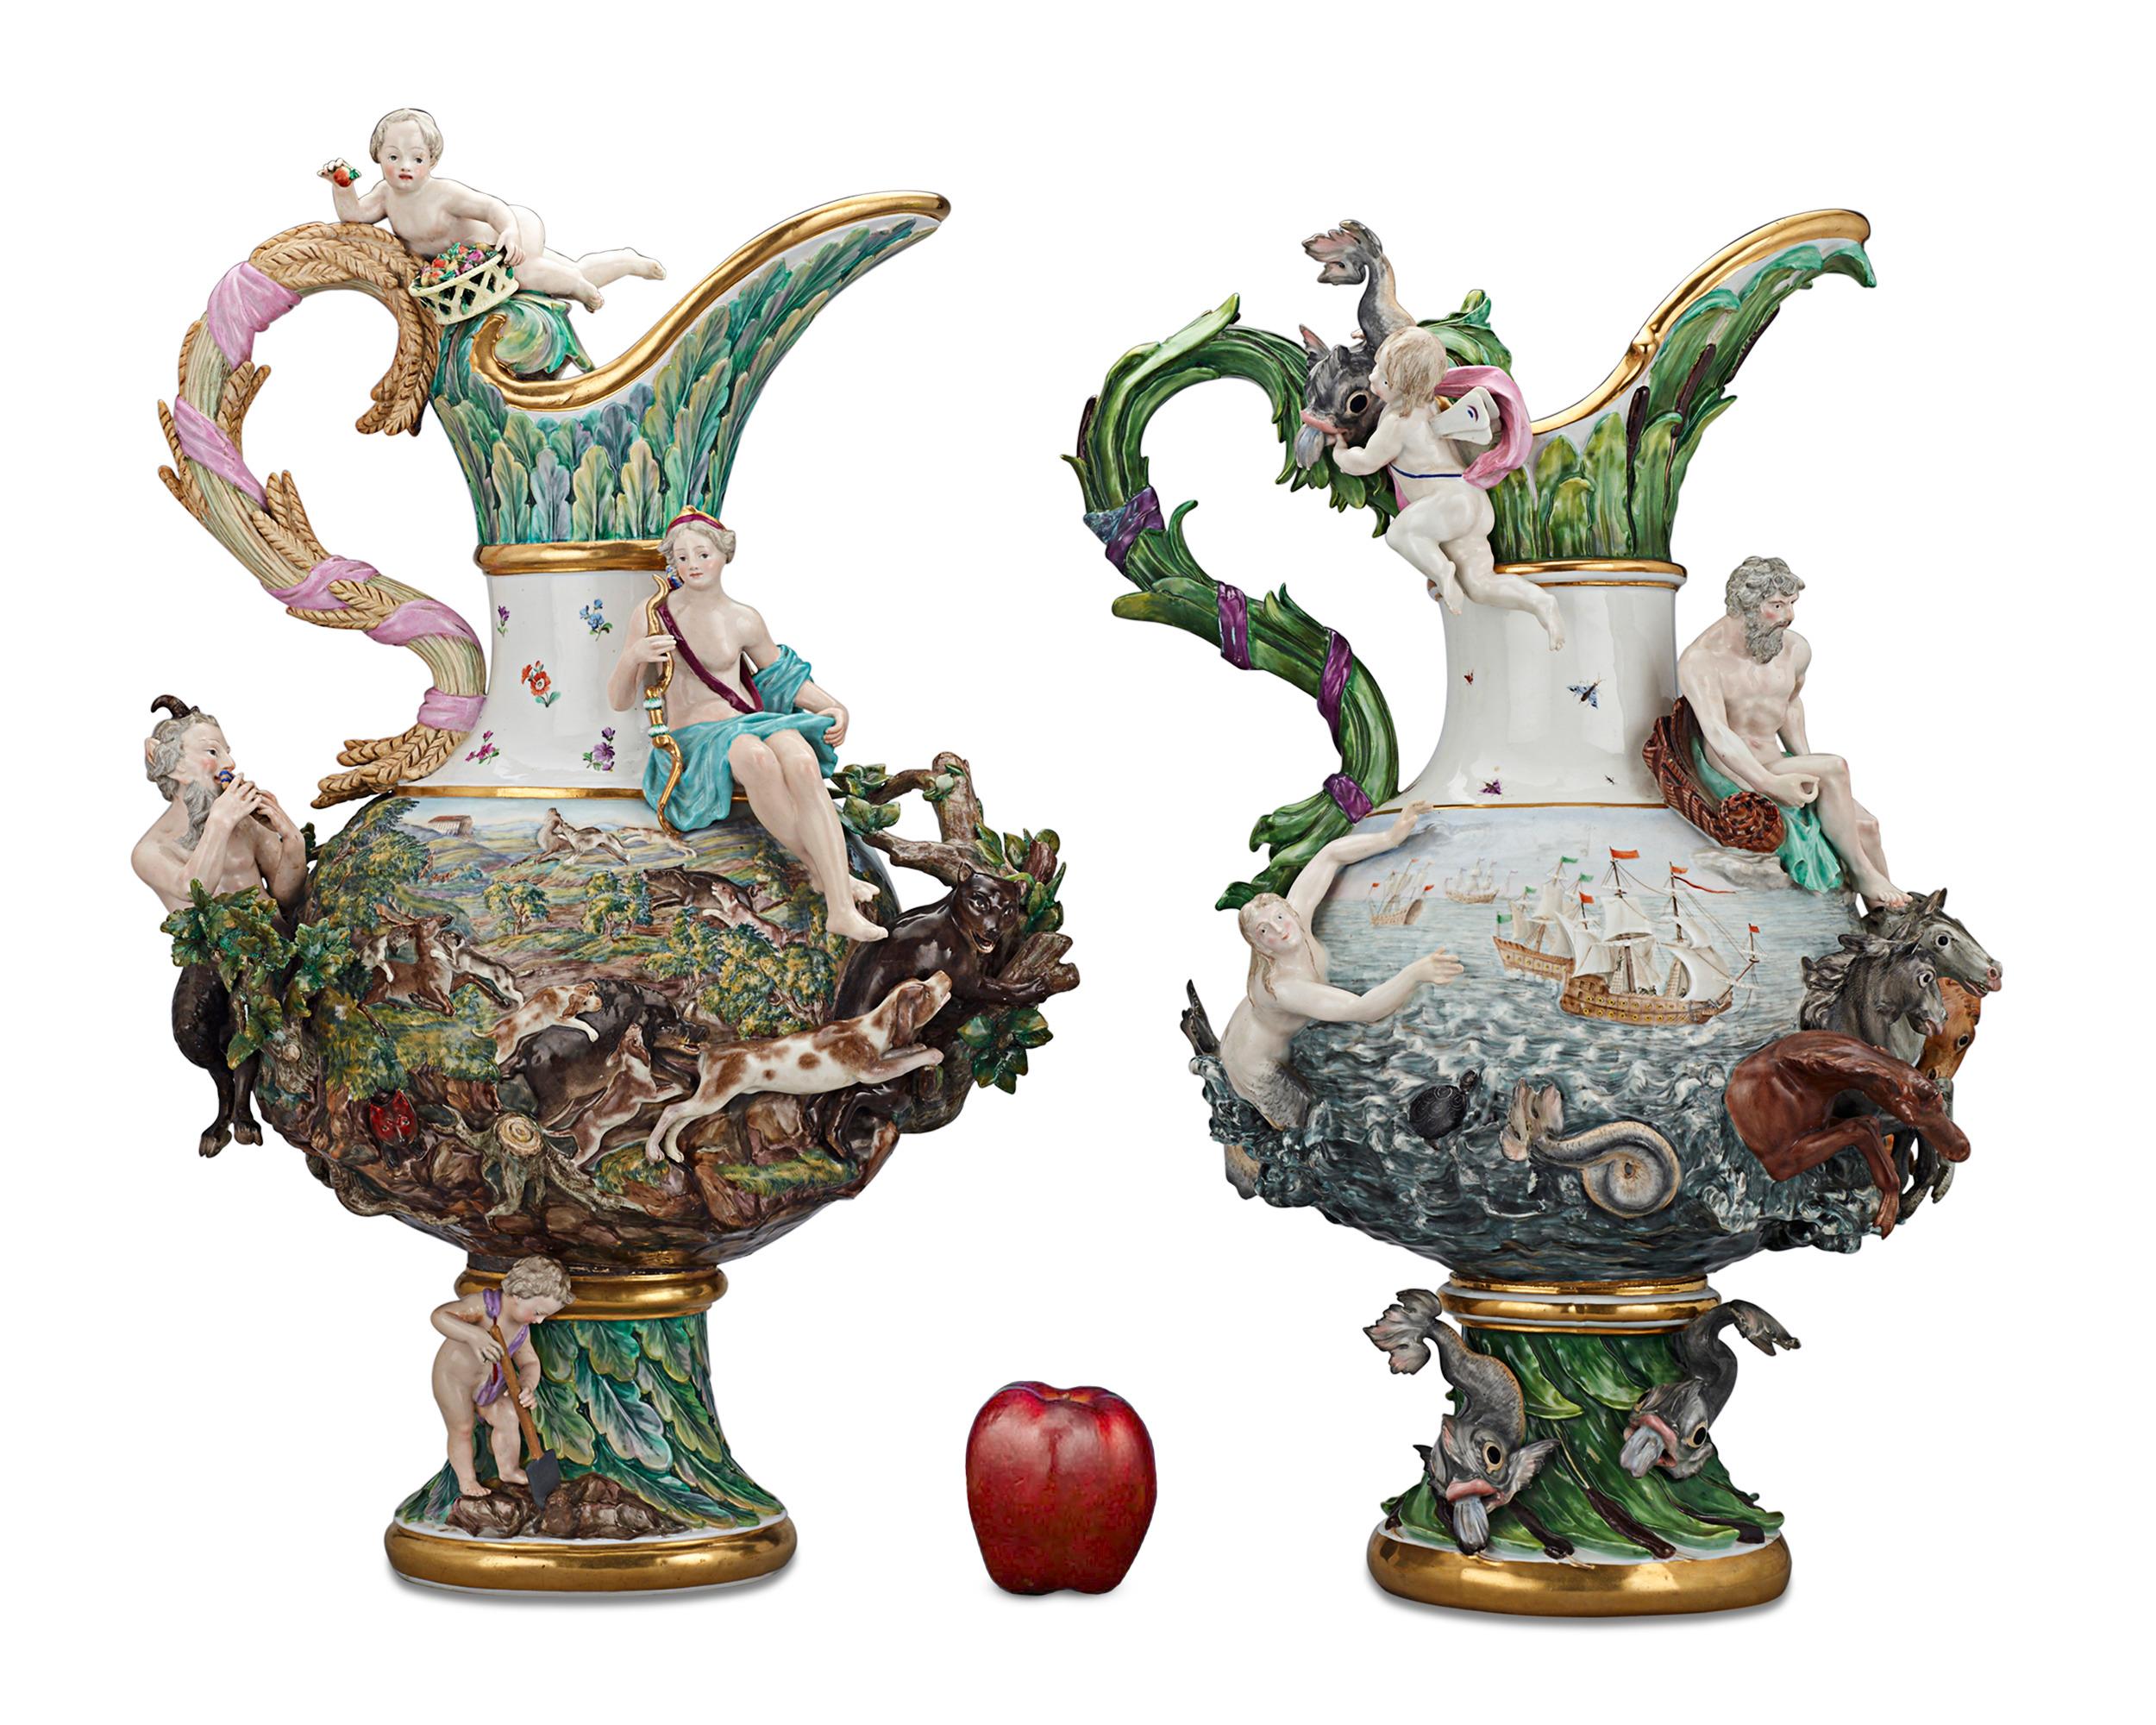 Rococo Four Elements Porcelain Ewers by Meissen